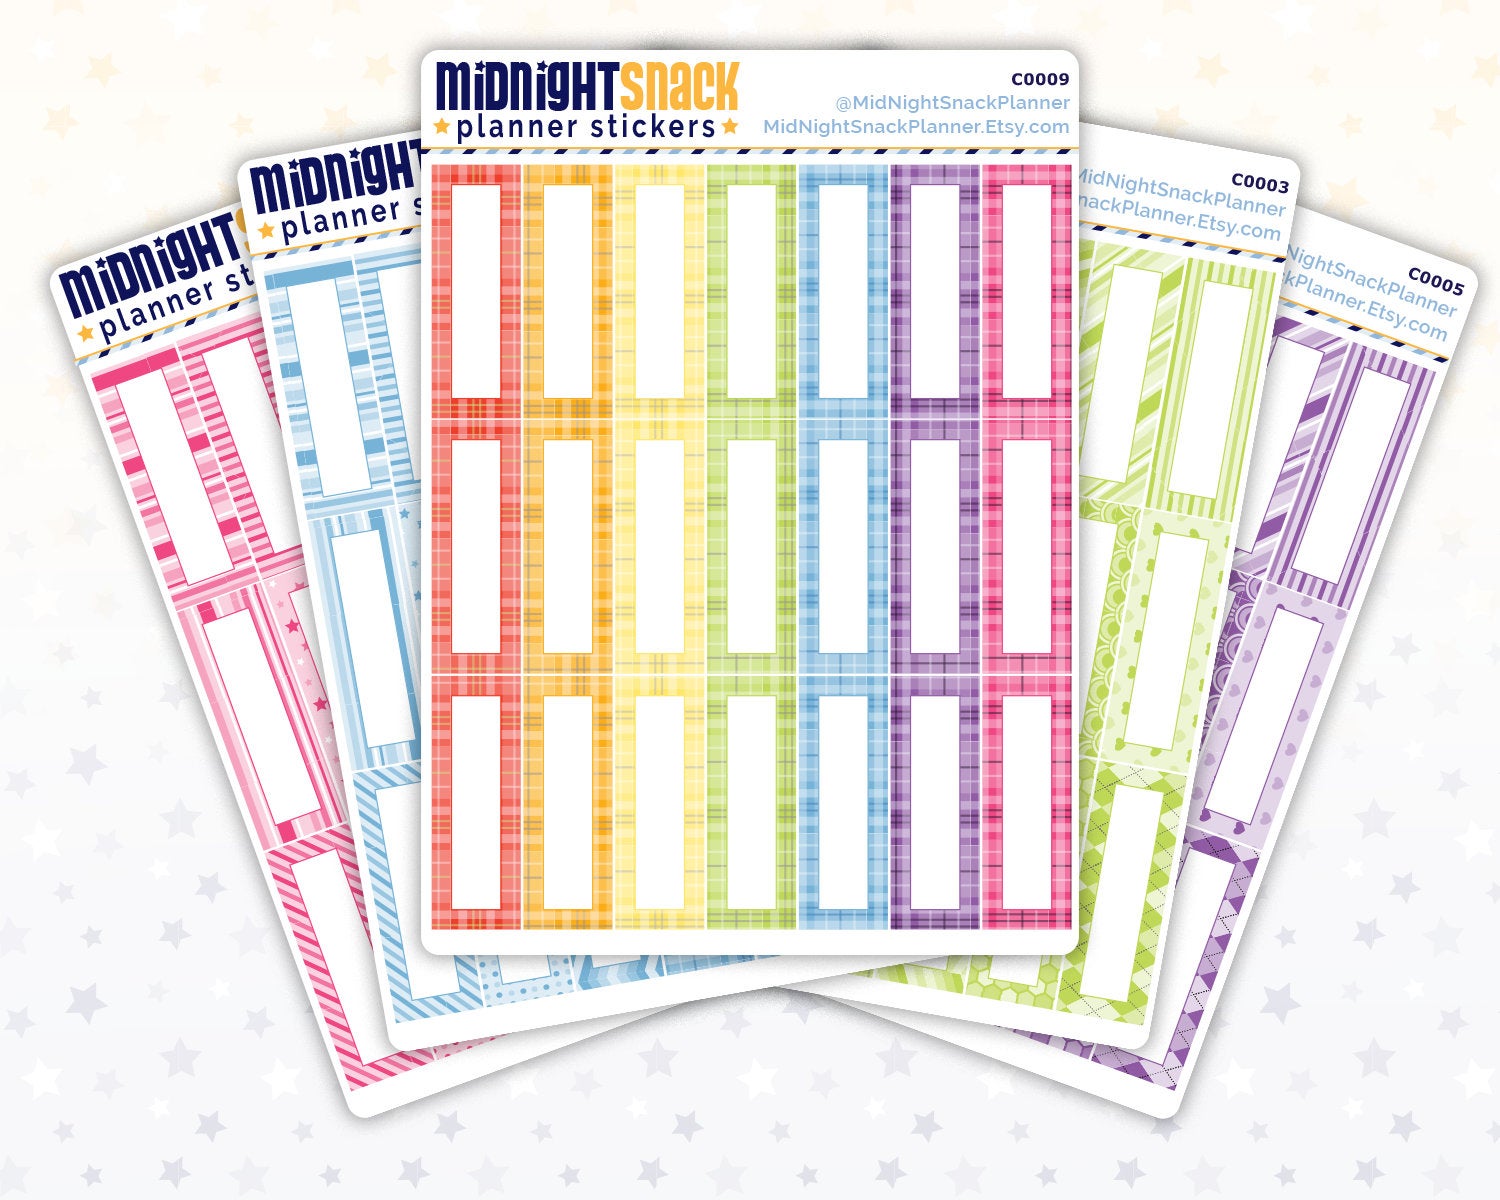 5 Sheet Bundle of Patterned Quarter Boxes Planner Sticker from Midnight Snack Planner